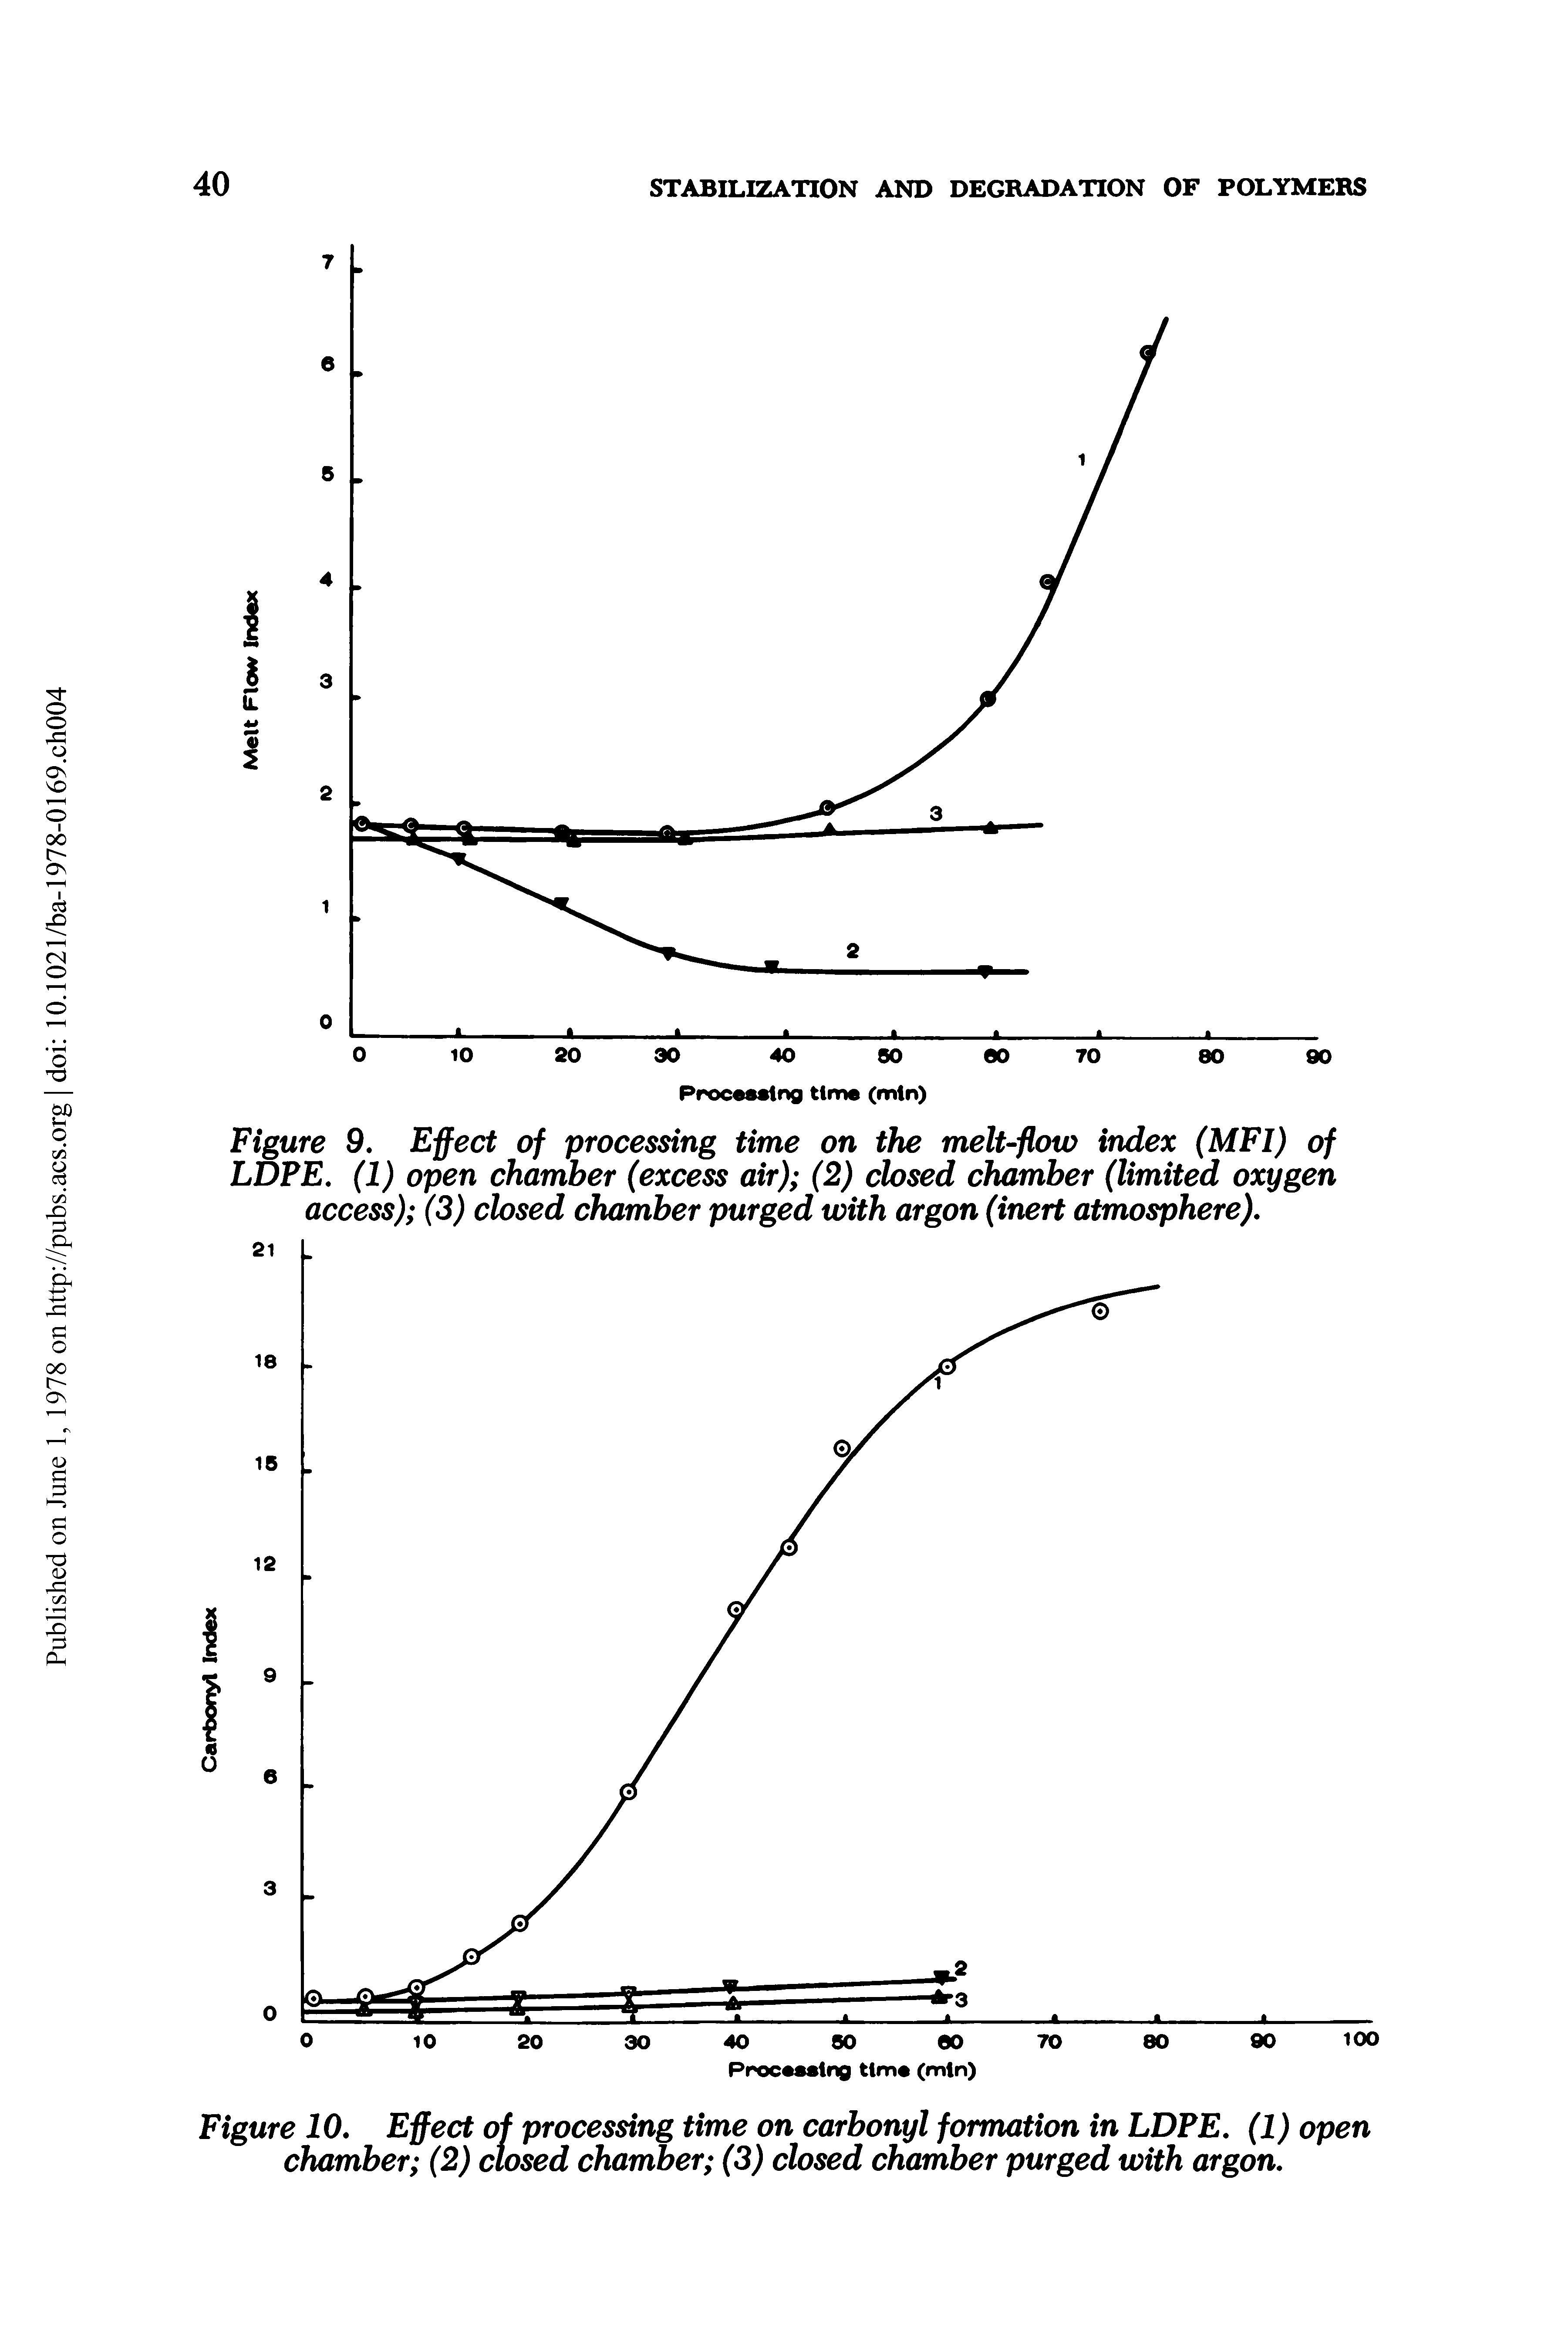 Figure 9. Effect of processing time on the melt-flow index (MFI) of LDPE. (1) open chamber (excess air) (2) closed chamber (limited oxygen access) (3) closed chamber purged with argon (inert atmosphere).